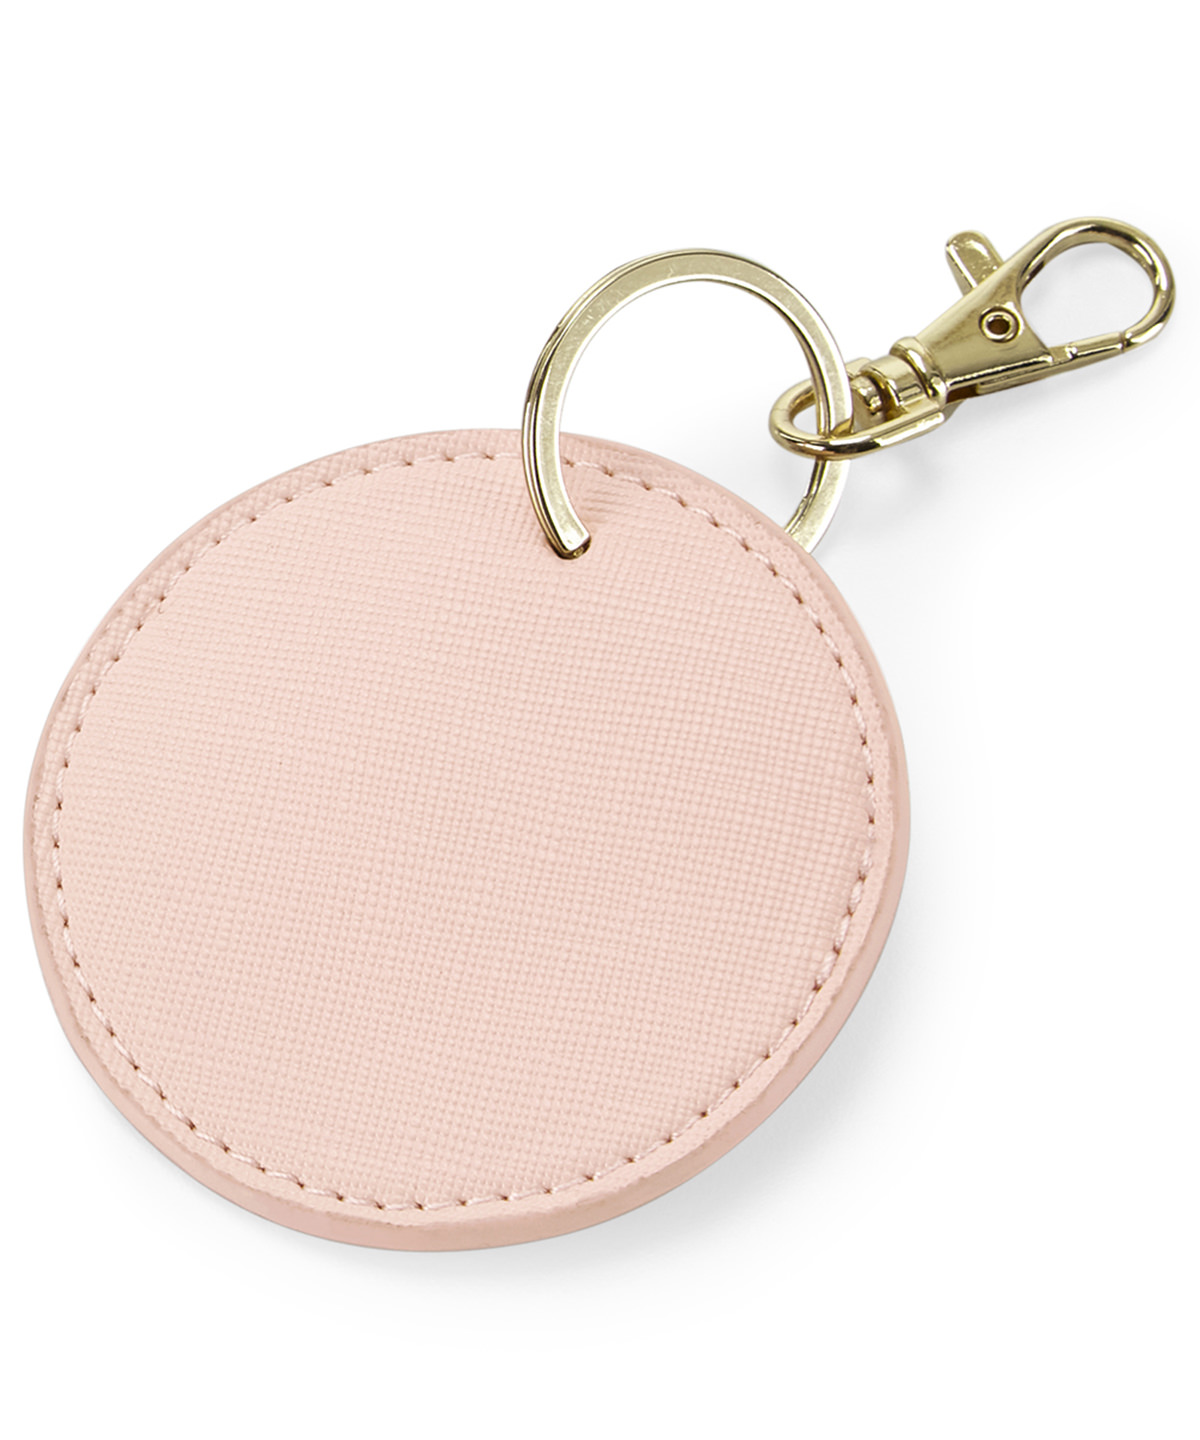 Boutique Circular Keyclip Soft Pink Size One Size